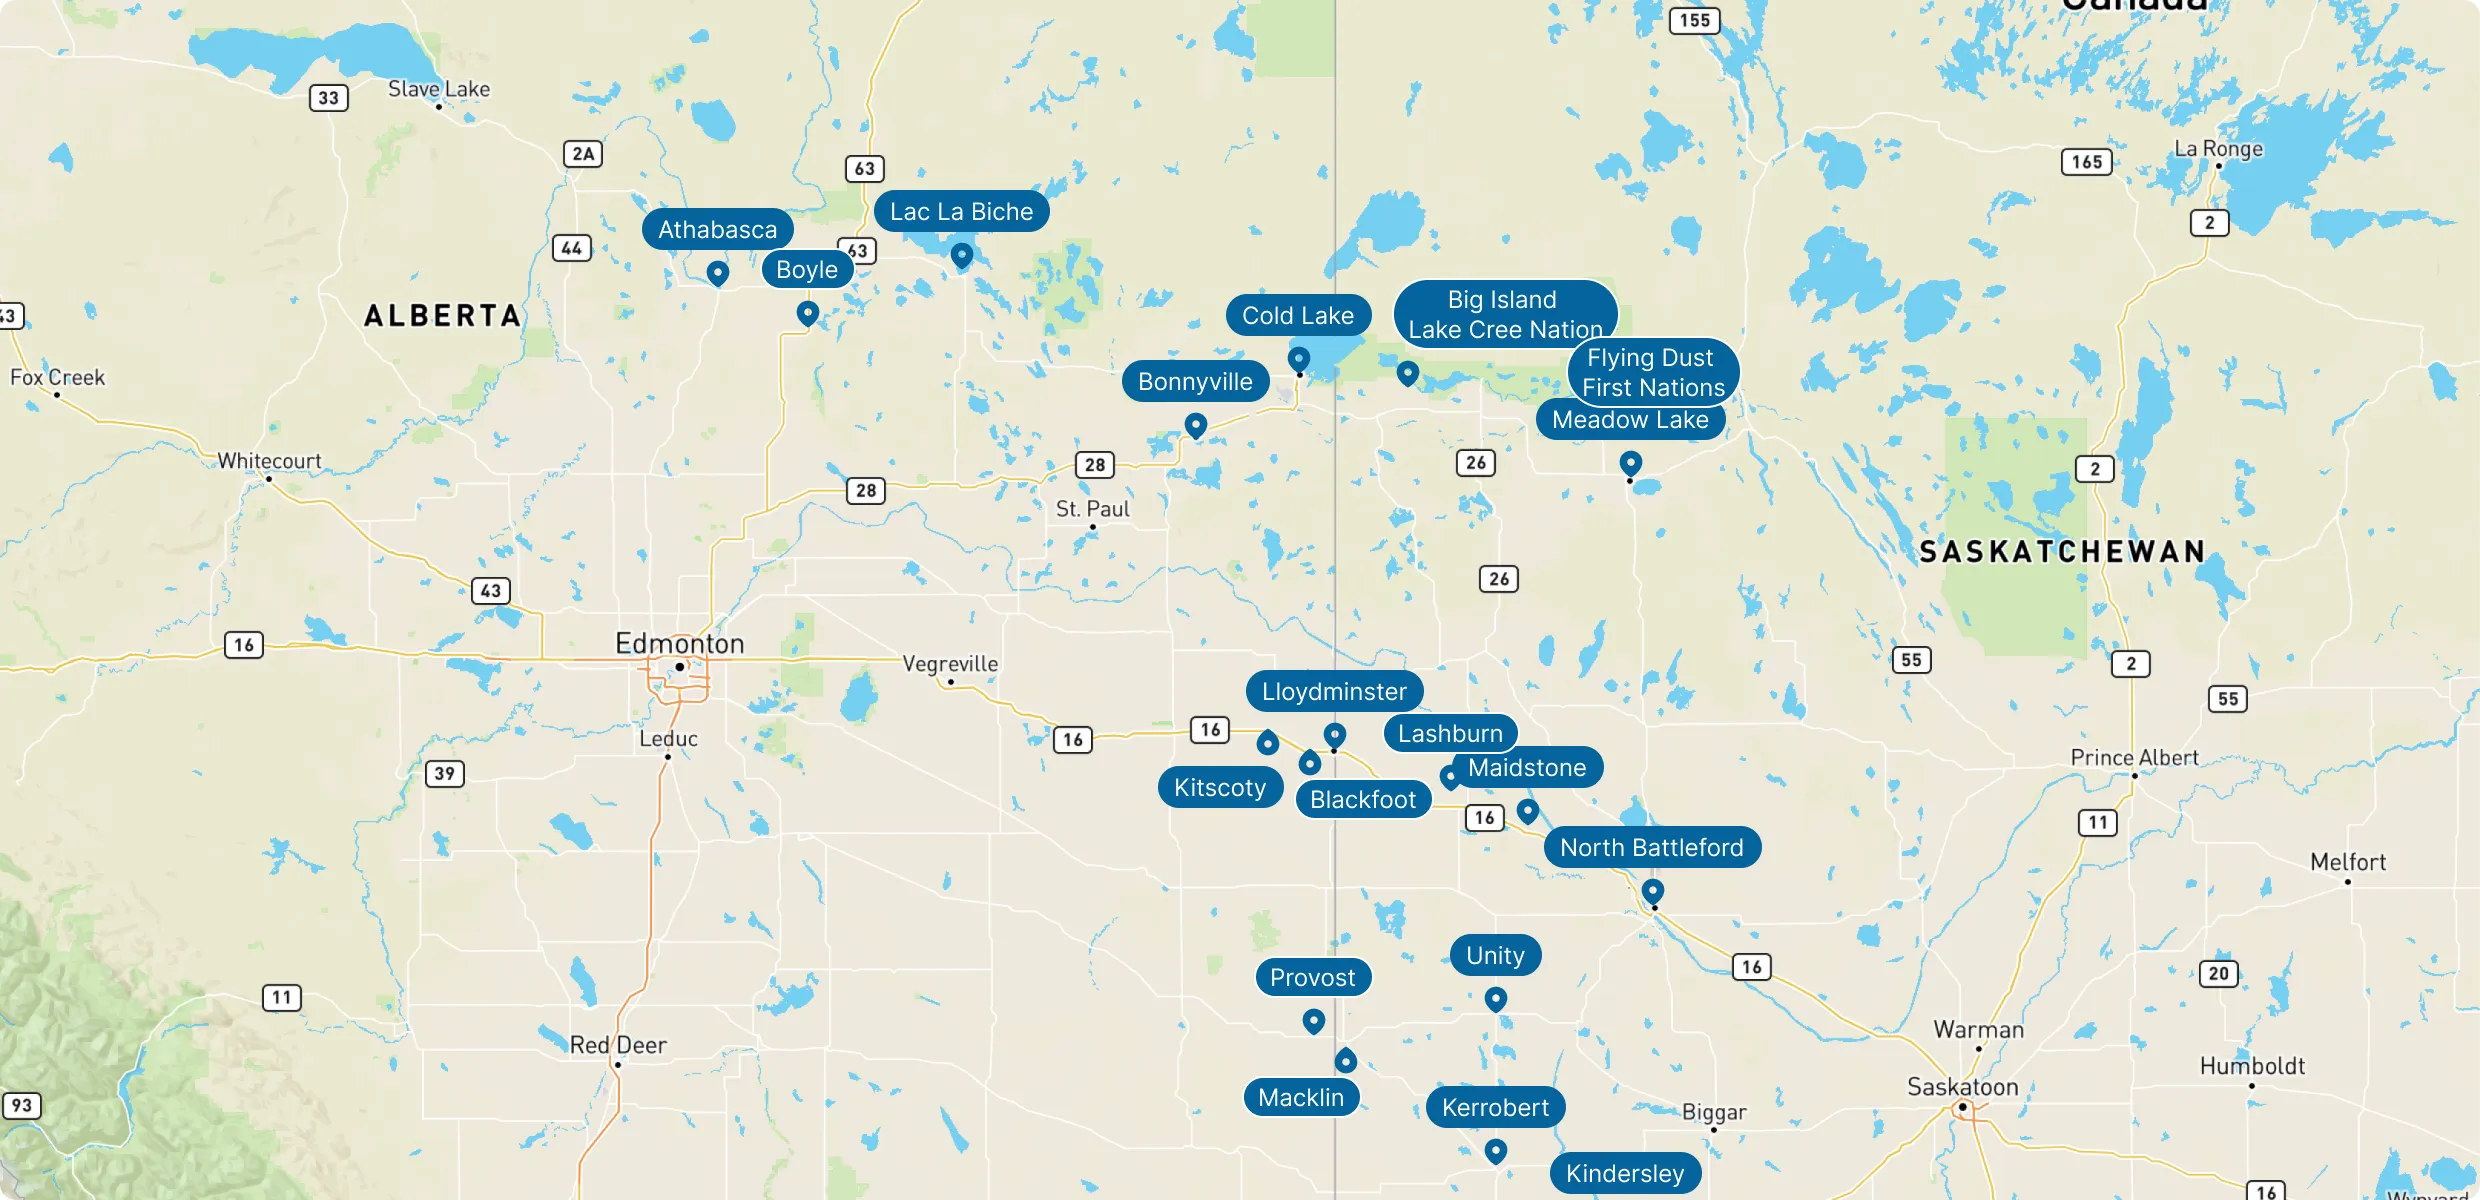 Map showing pins on cities including Lloydminster, AB/SK, Cold Lake, AB. North Battleford, SK. Bonnyville, AB. Meadow Lake, SK. Kindersley, SK. Battleford, SK. Athabasca, AB. Lac La Biche, AB. Unity, SK, Provost, AB. Big Island Lake Cree Nation, SK. Macklin, SK. Blackfoot, AB. Wilkie, SK. Lashburn, SK. Maidstone, SK. Flying Dust First Nations, SK. Kerrobert, SK. Kitscoty, AB. and Boyle, A